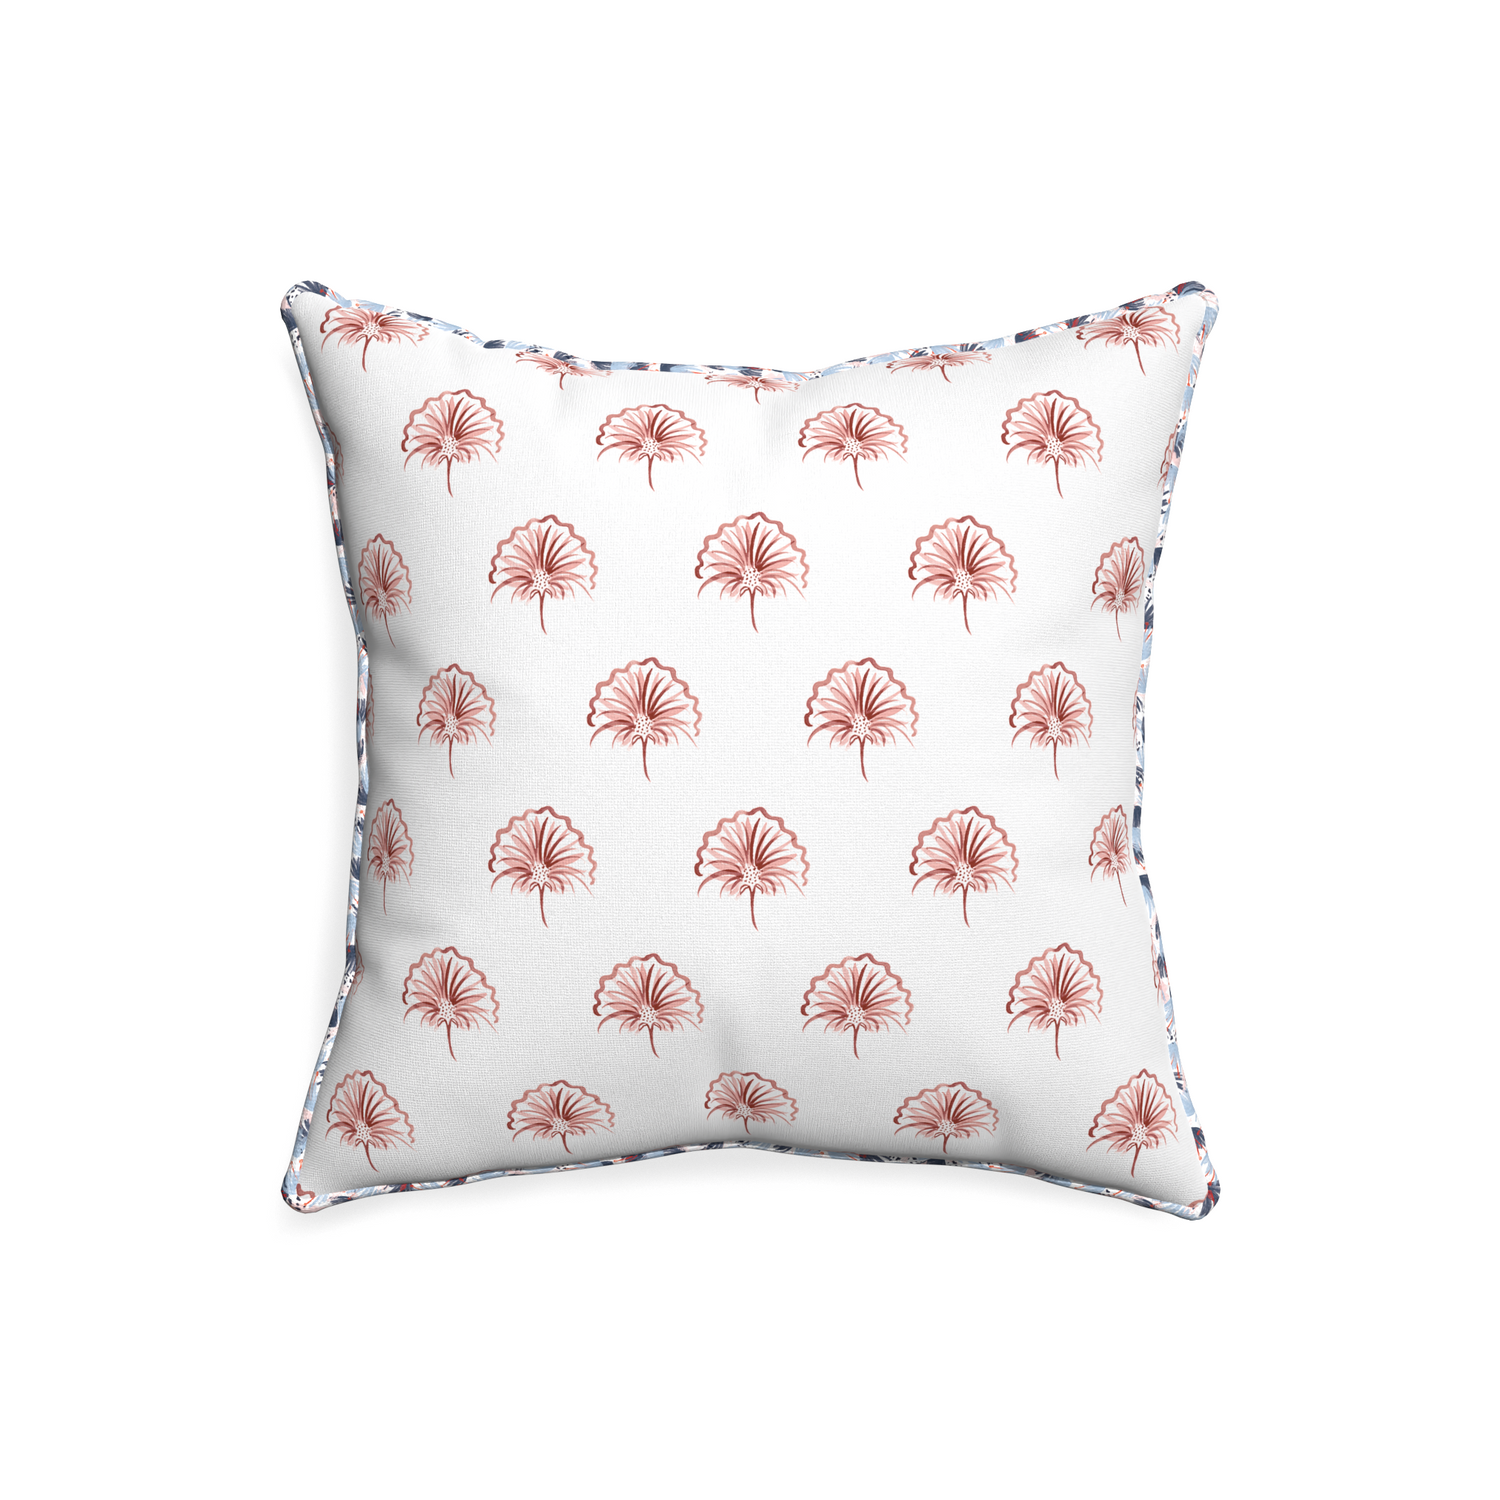 20-square penelope rose custom pillow with e piping on white background